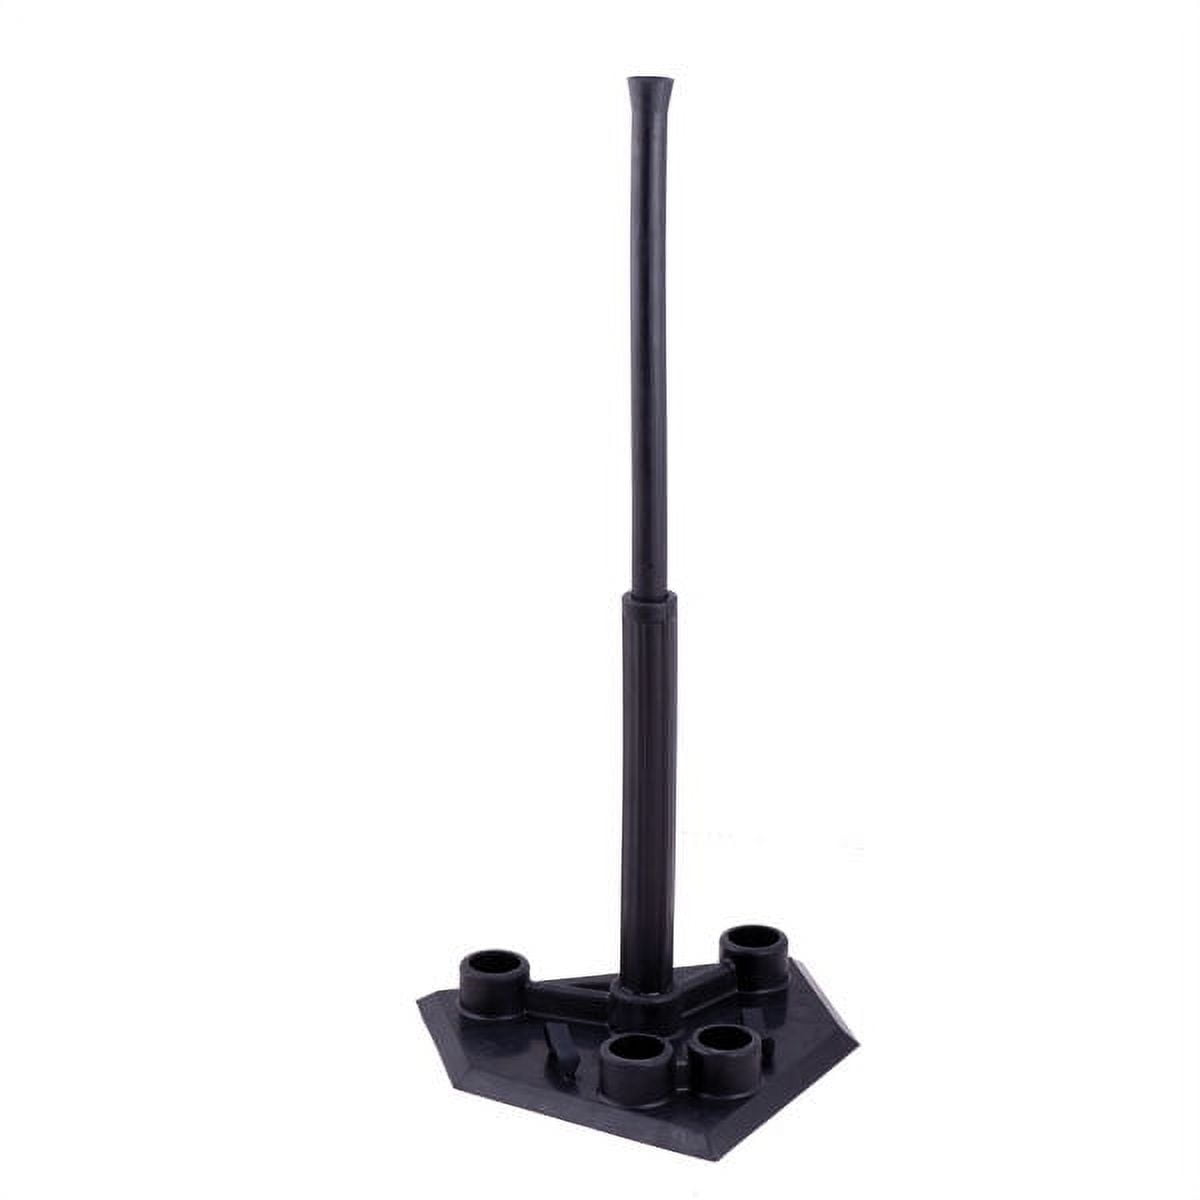 Picture of Champion Sports BT105 Portable Batting Tee, Black - 5 Position